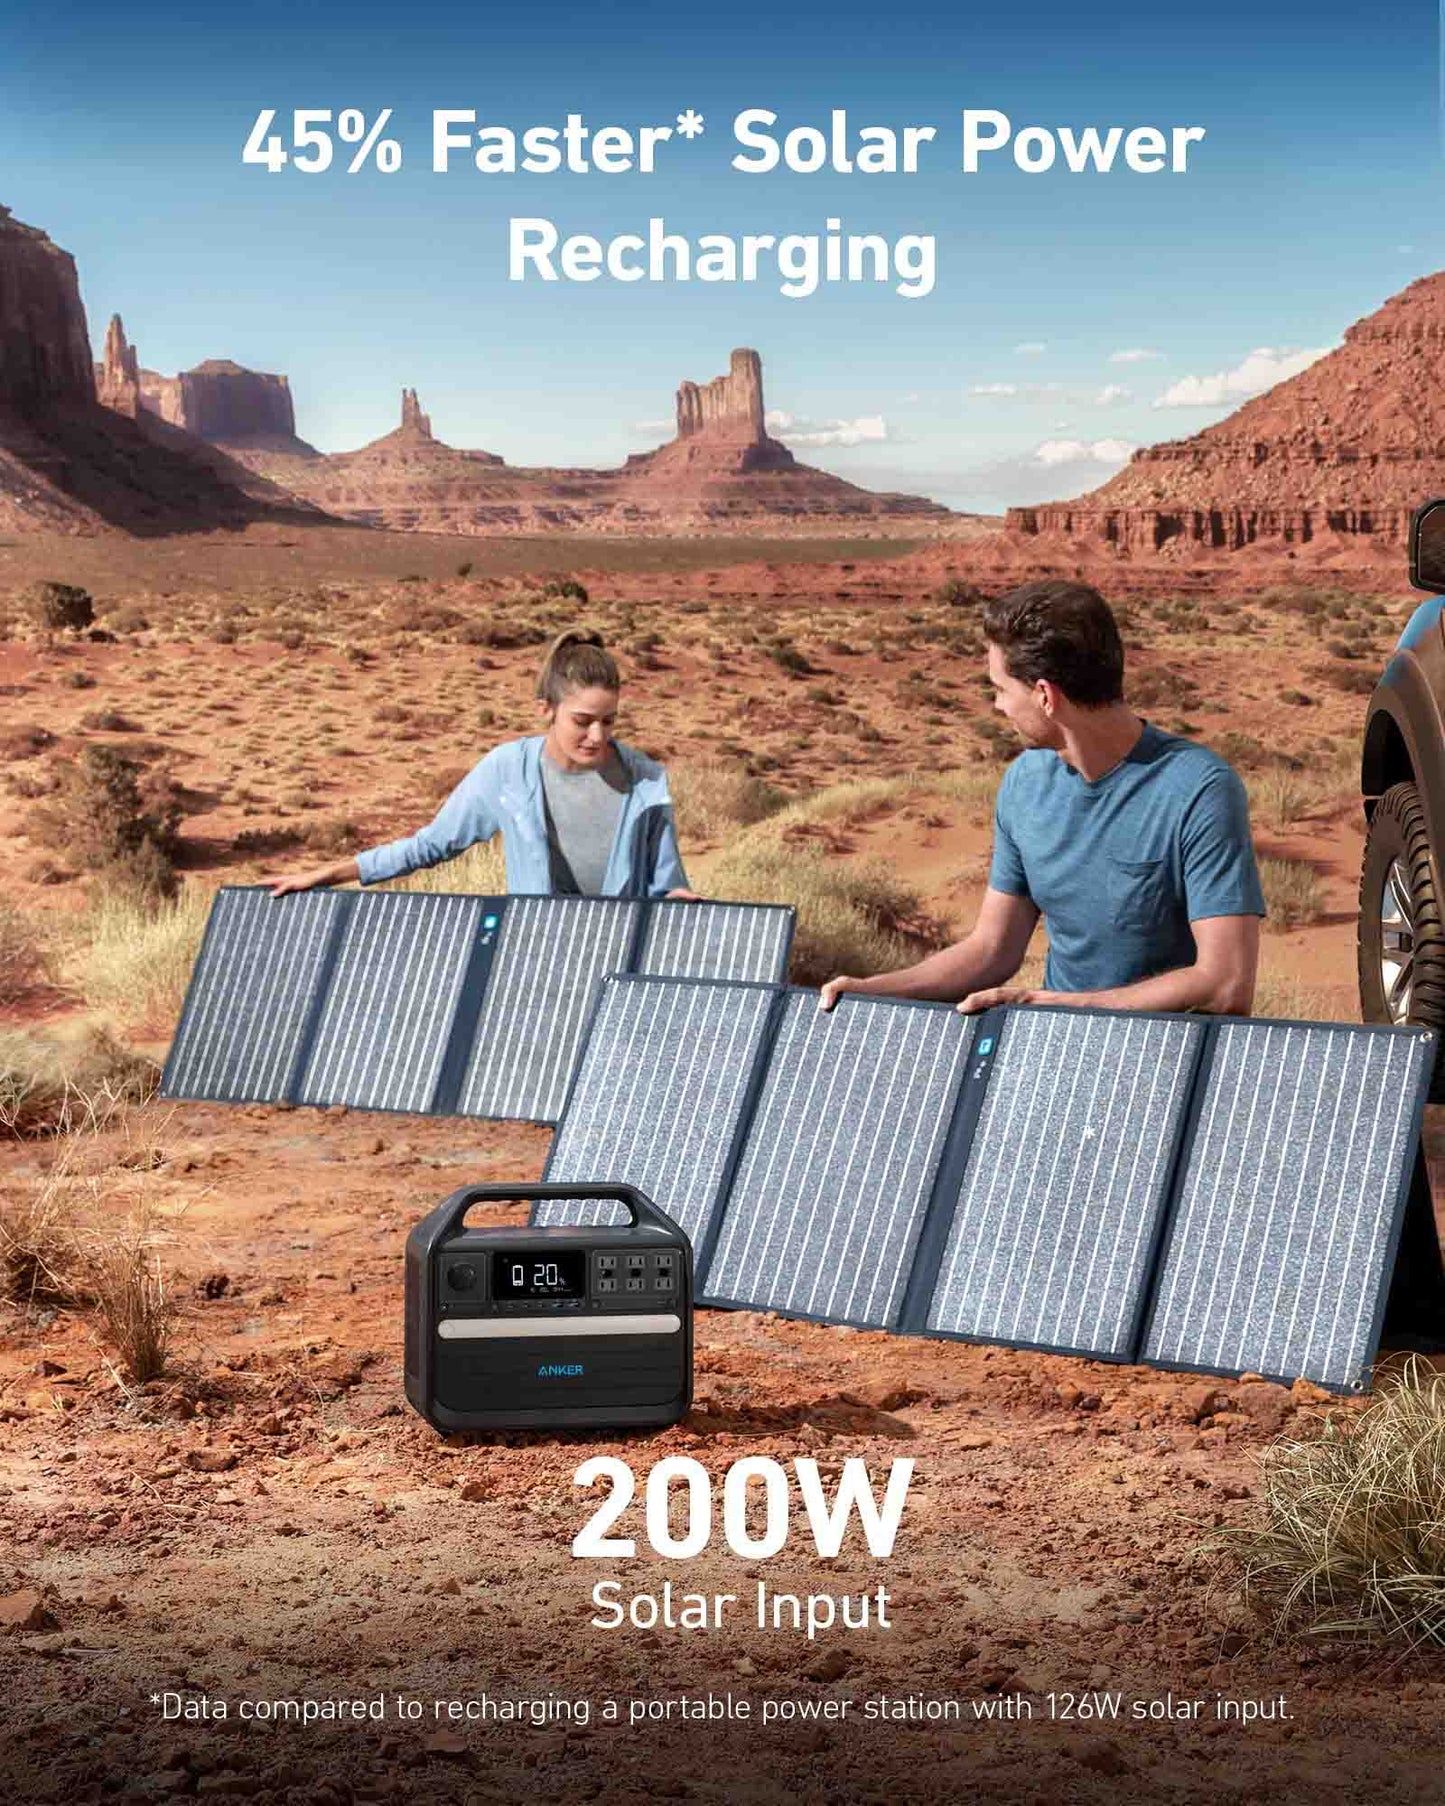 Achieve 45% Faster Solar Power Recharging When Using Solar Panels To Recharge The Anker PowerHouse 555